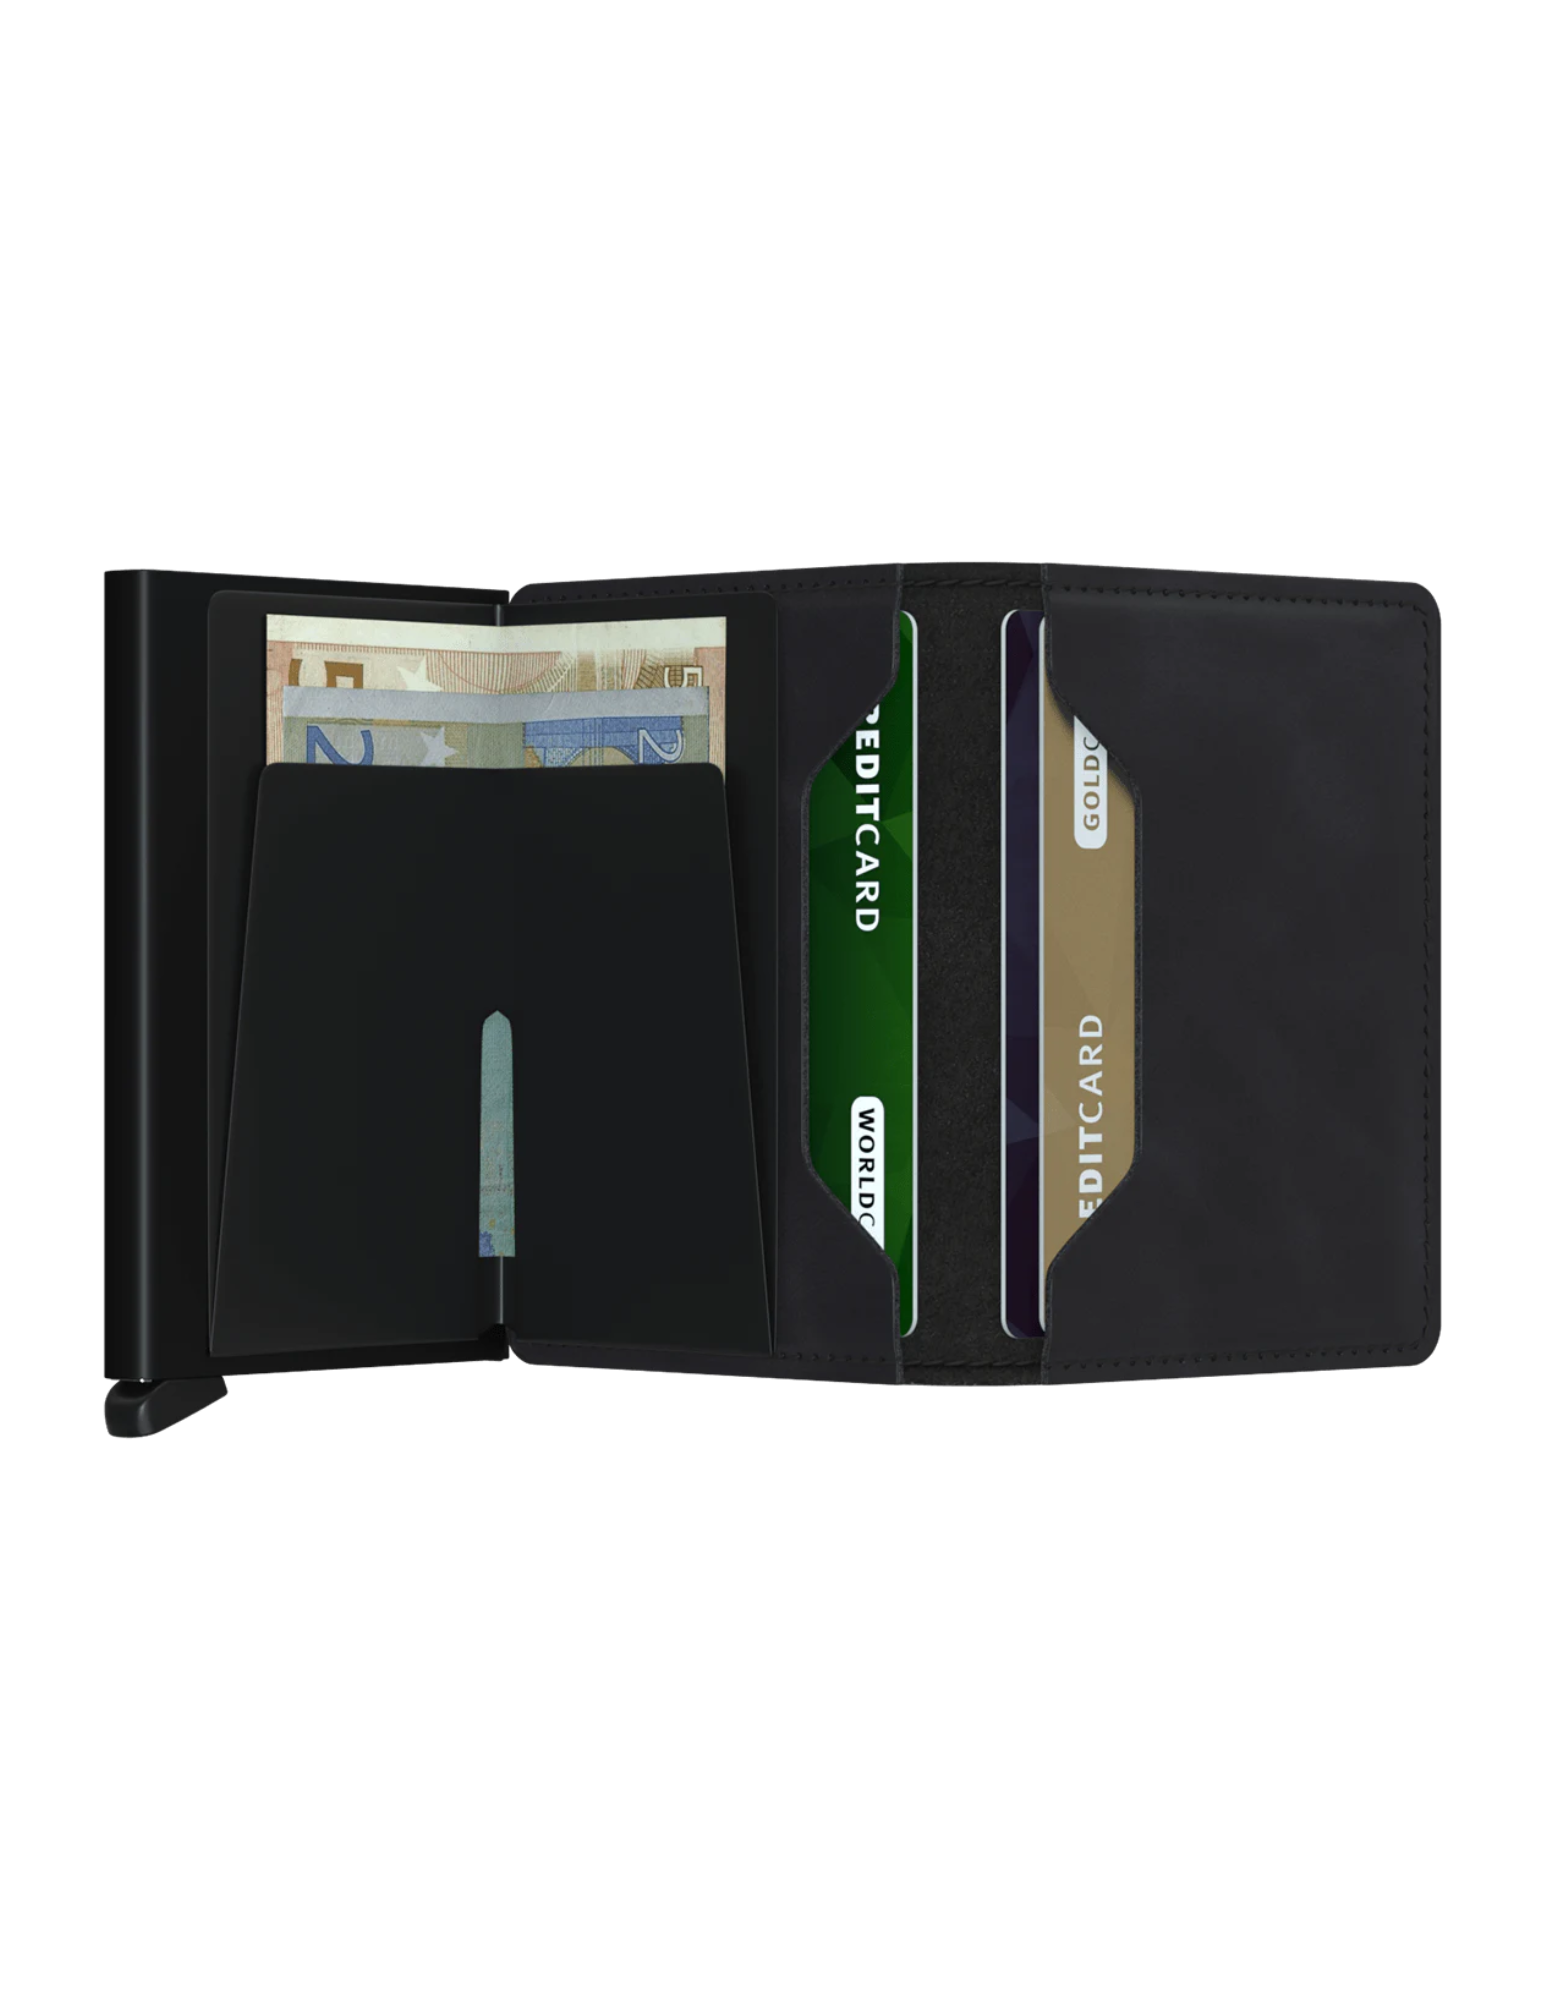 Small in size and surprisingly large in storage capacity, the Miniwallet combines the best of both worlds. The exterior holds banknotes, receipt and cards, while the aluminium Cardprotector allows you to slide out cards with one simple motion and protects them from bending, breaking and unwanted wireless communication.